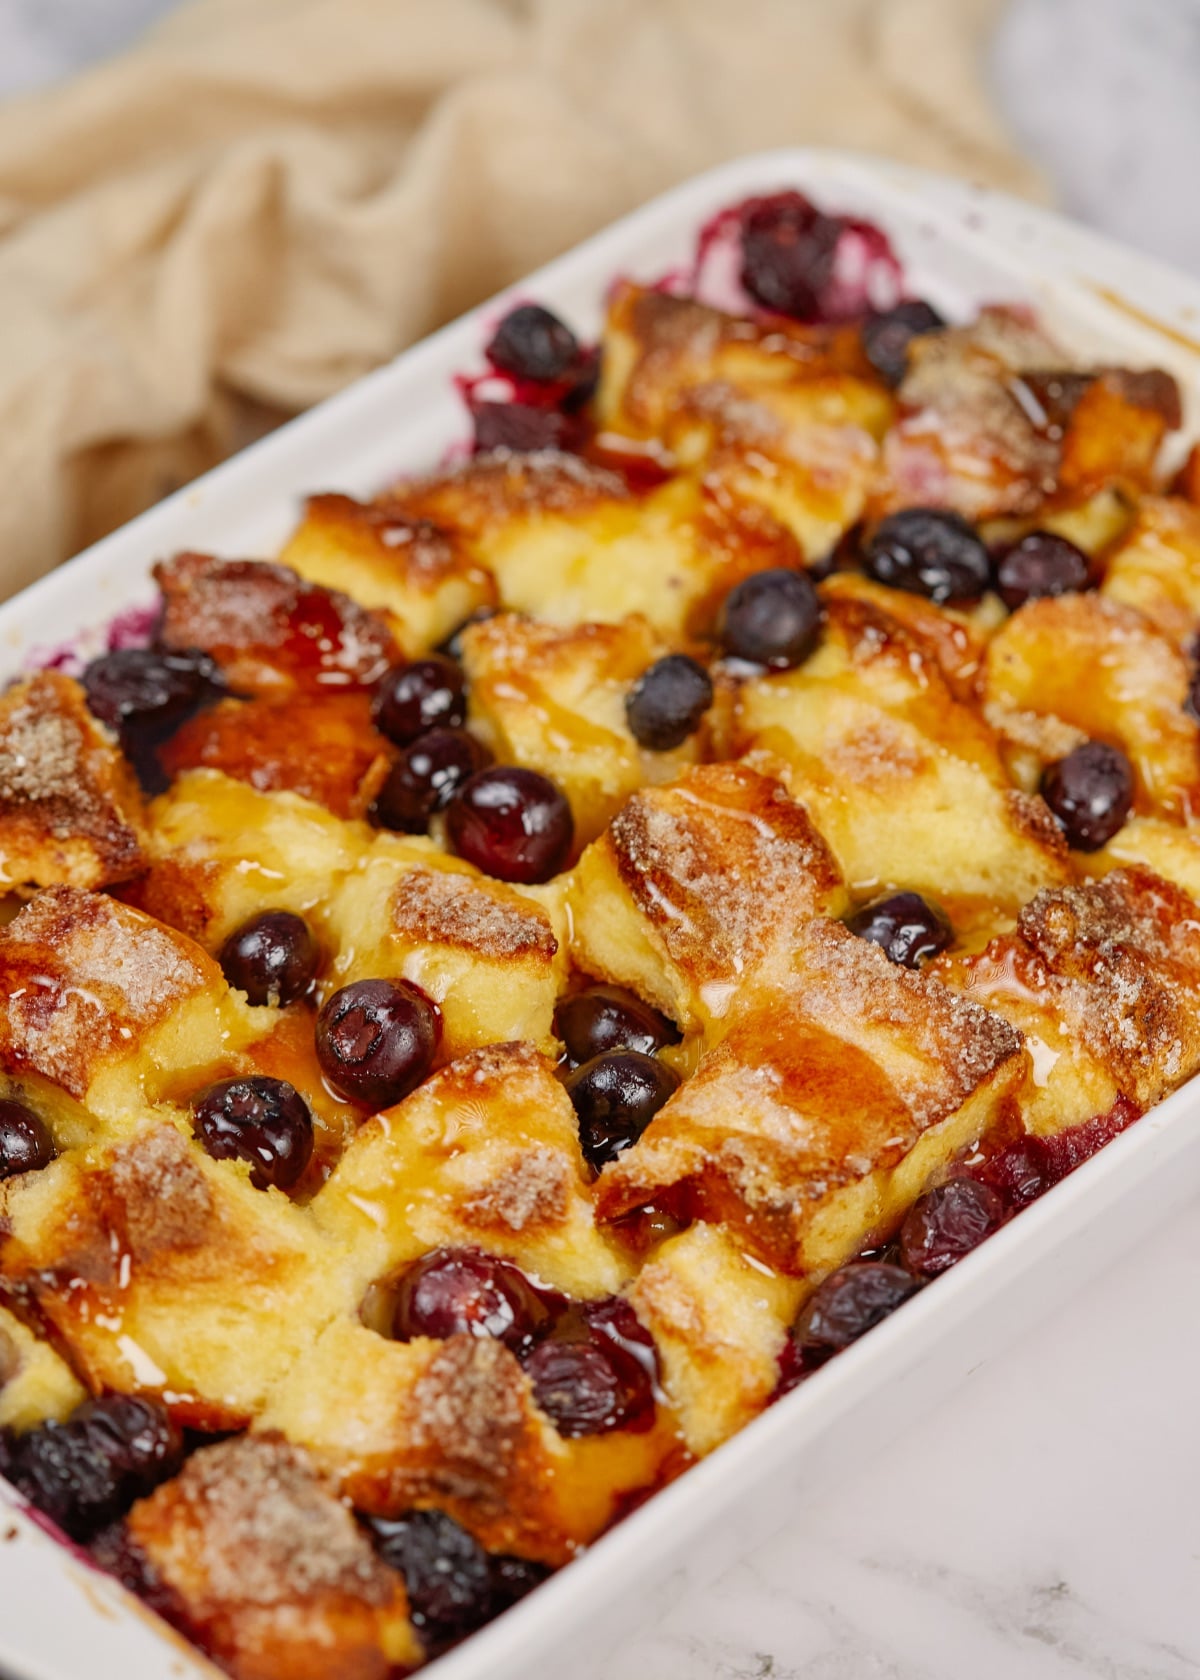 baked blueberry french toast casserole in a white baking dish on a wooden board